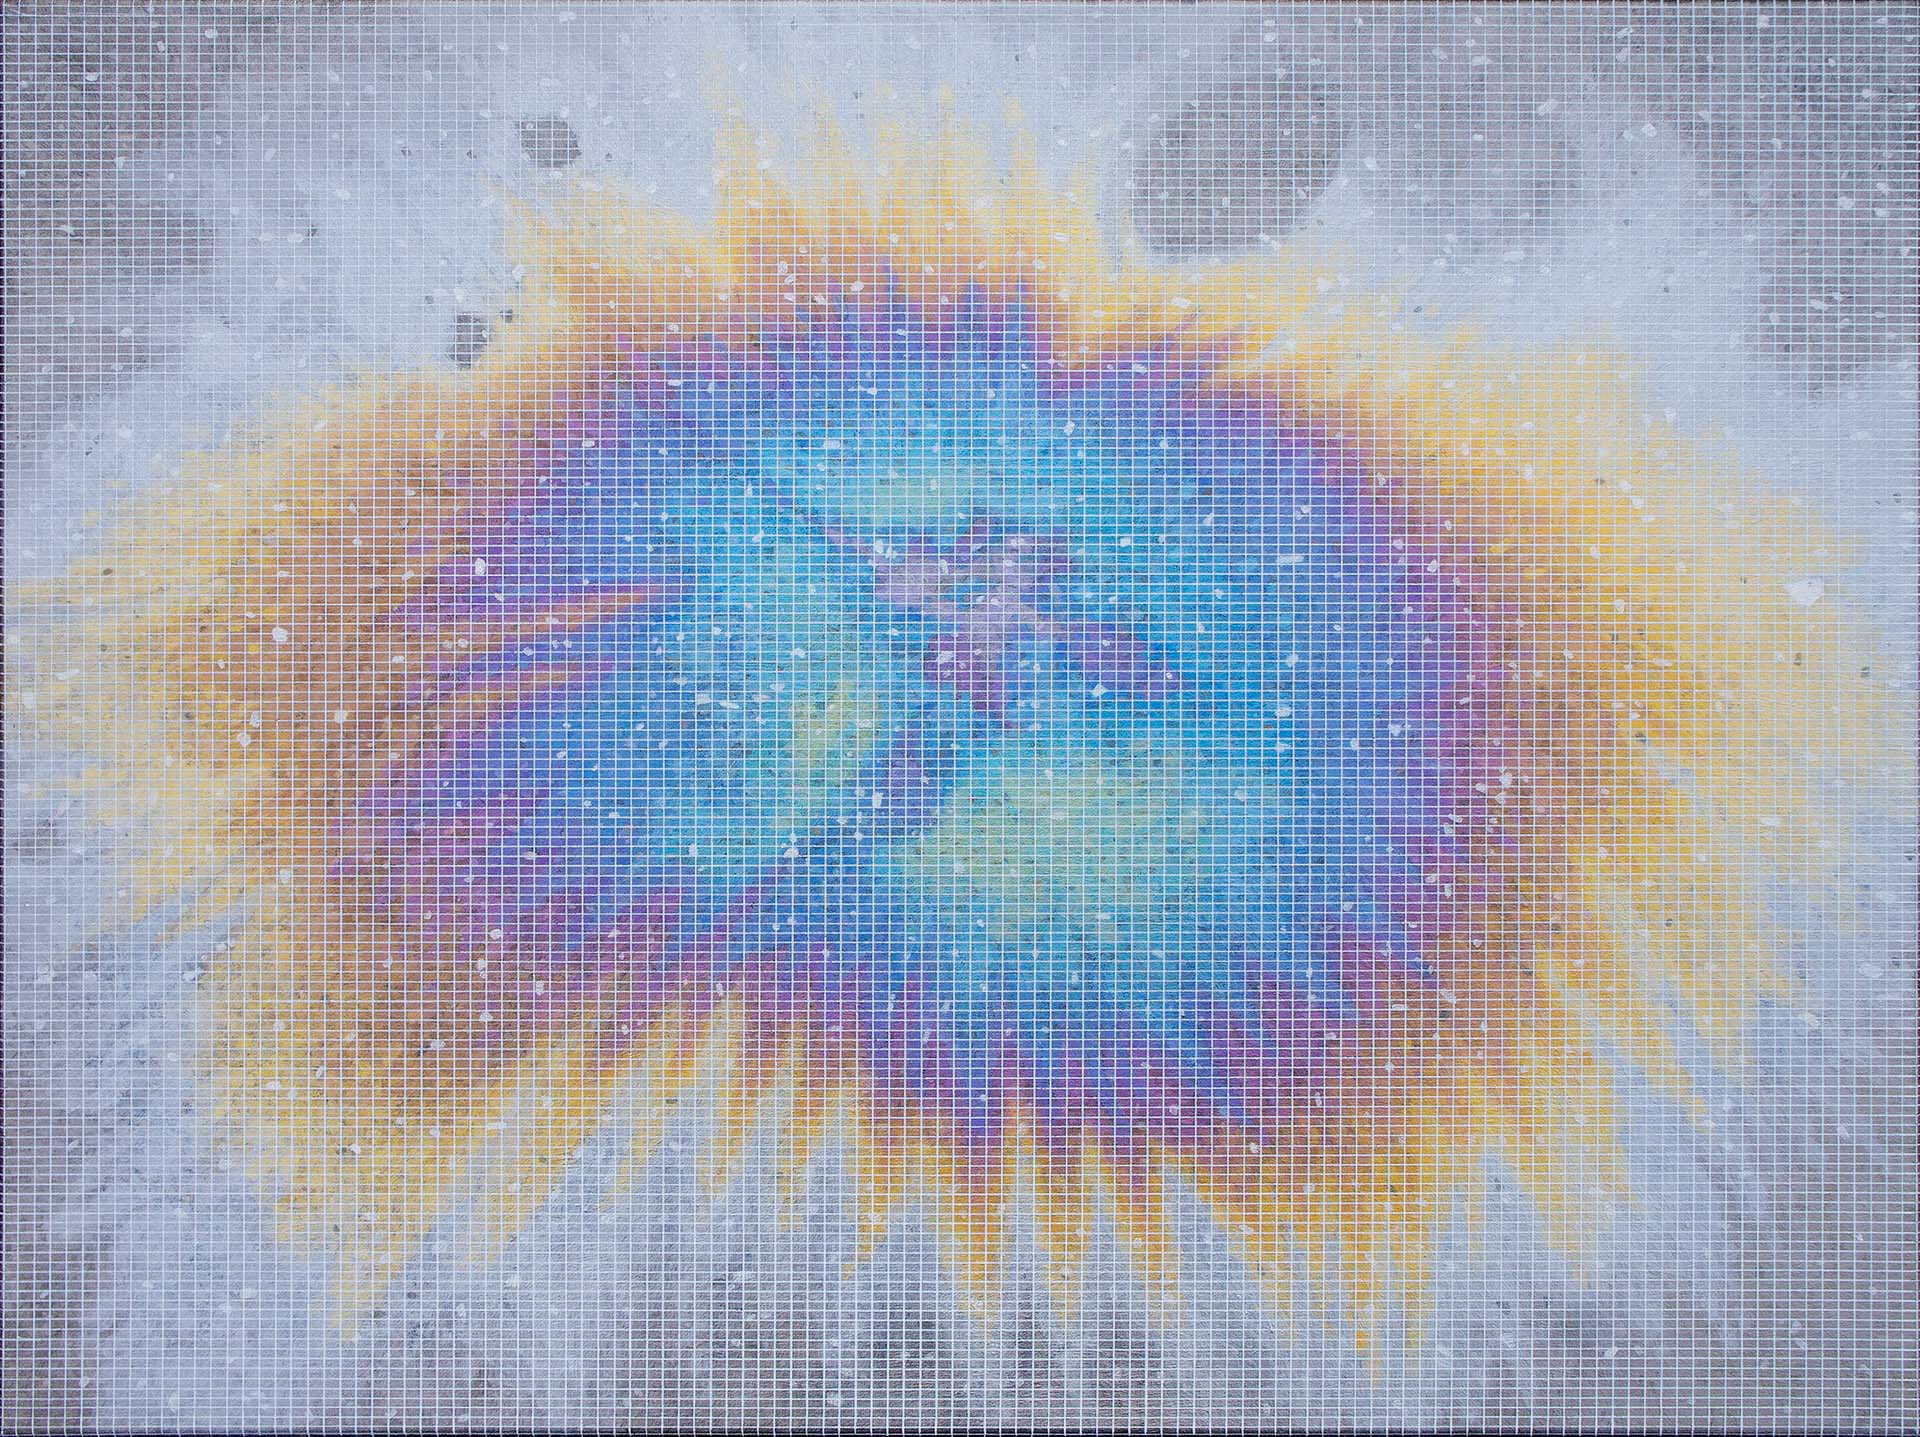 Oil Slick with Grid 6, 2022, acrylic on linen, 450 x 600mm